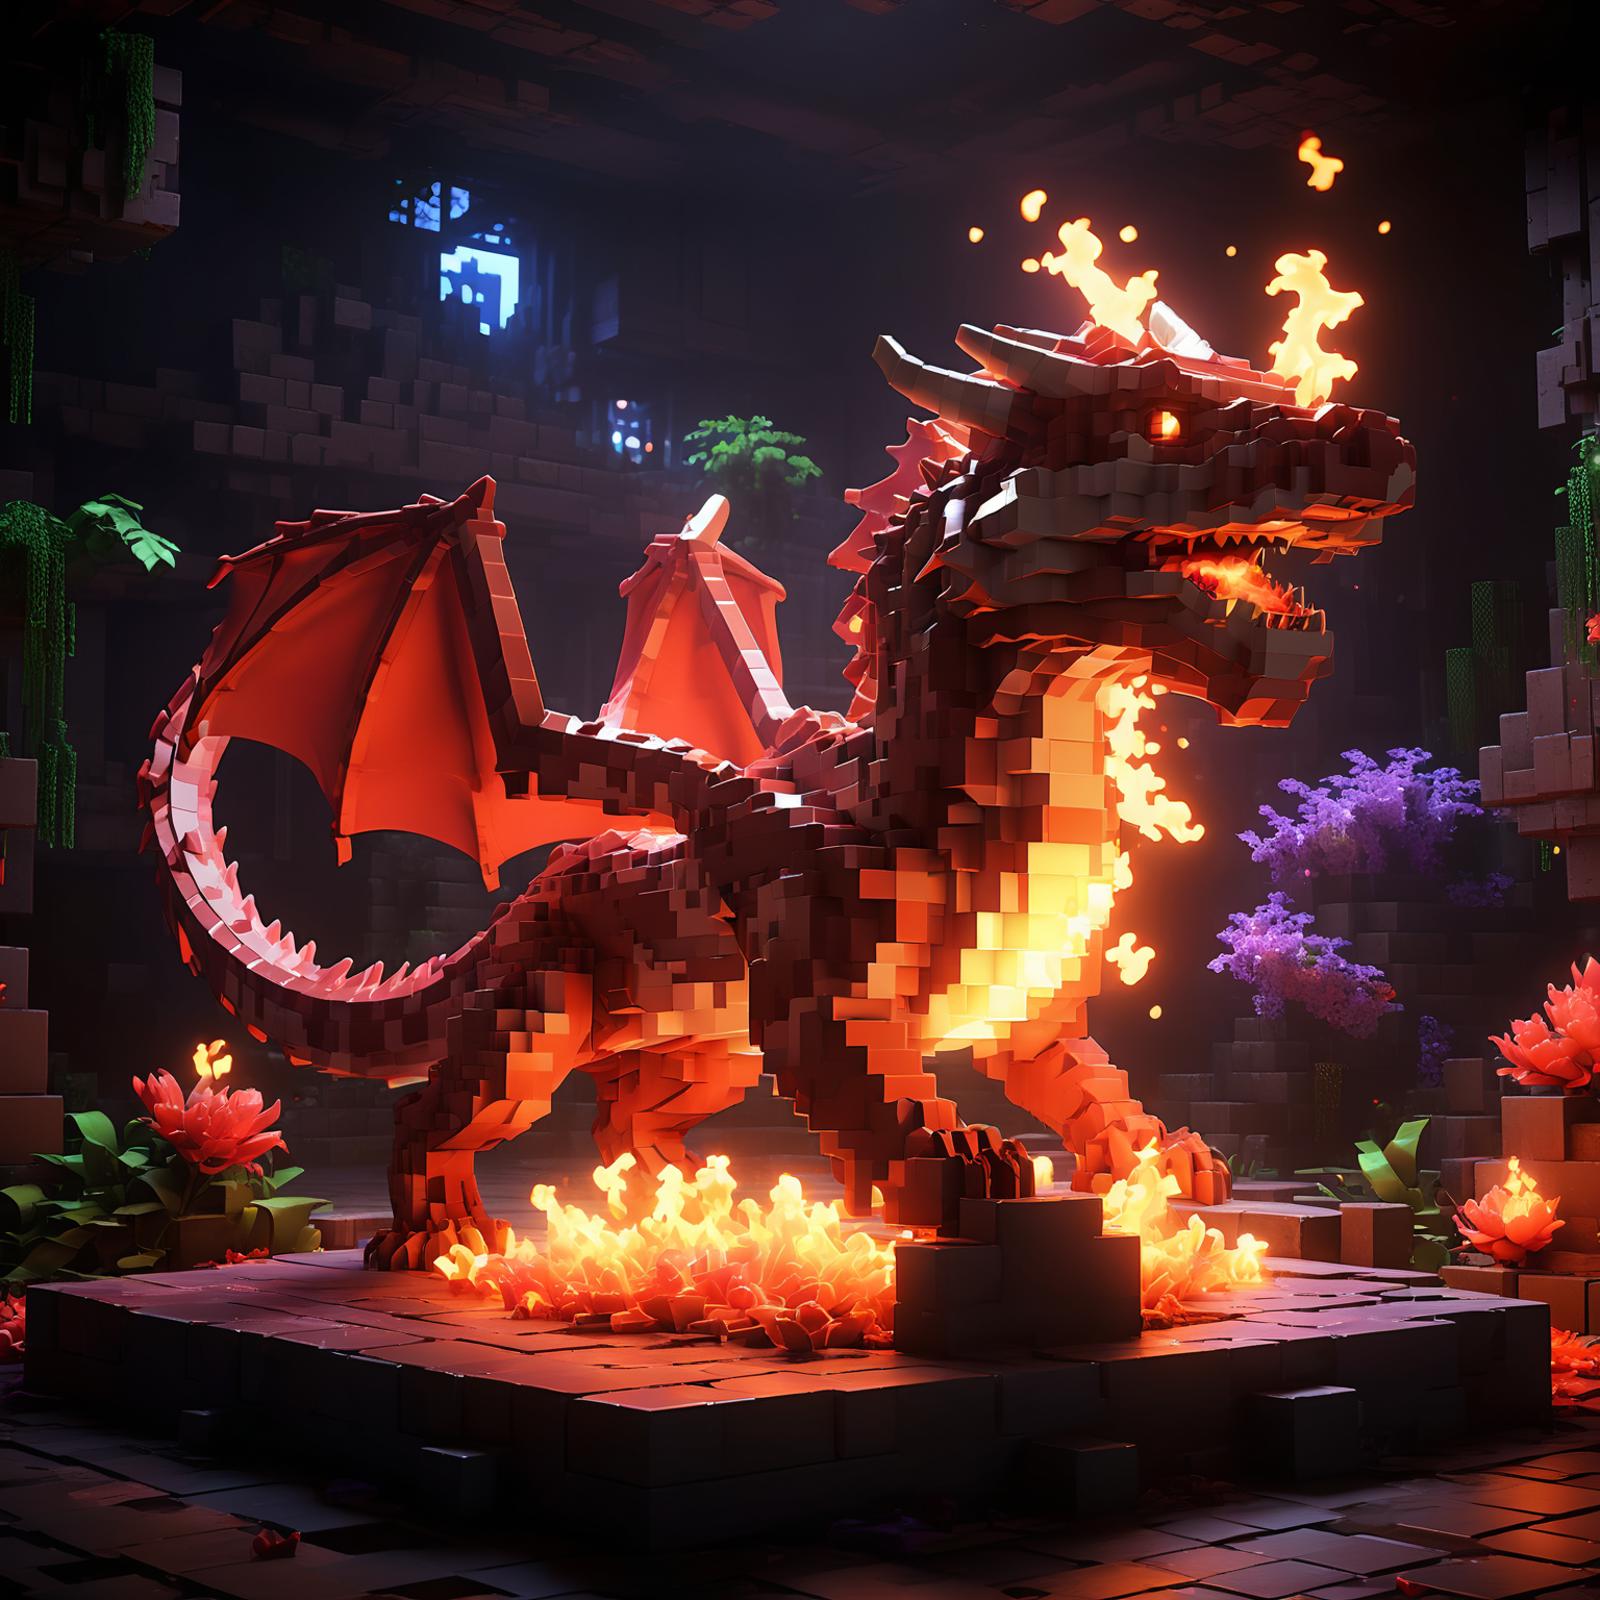 【SDXL】MineCraft or Lego ? | Dataset image by J77gonzales